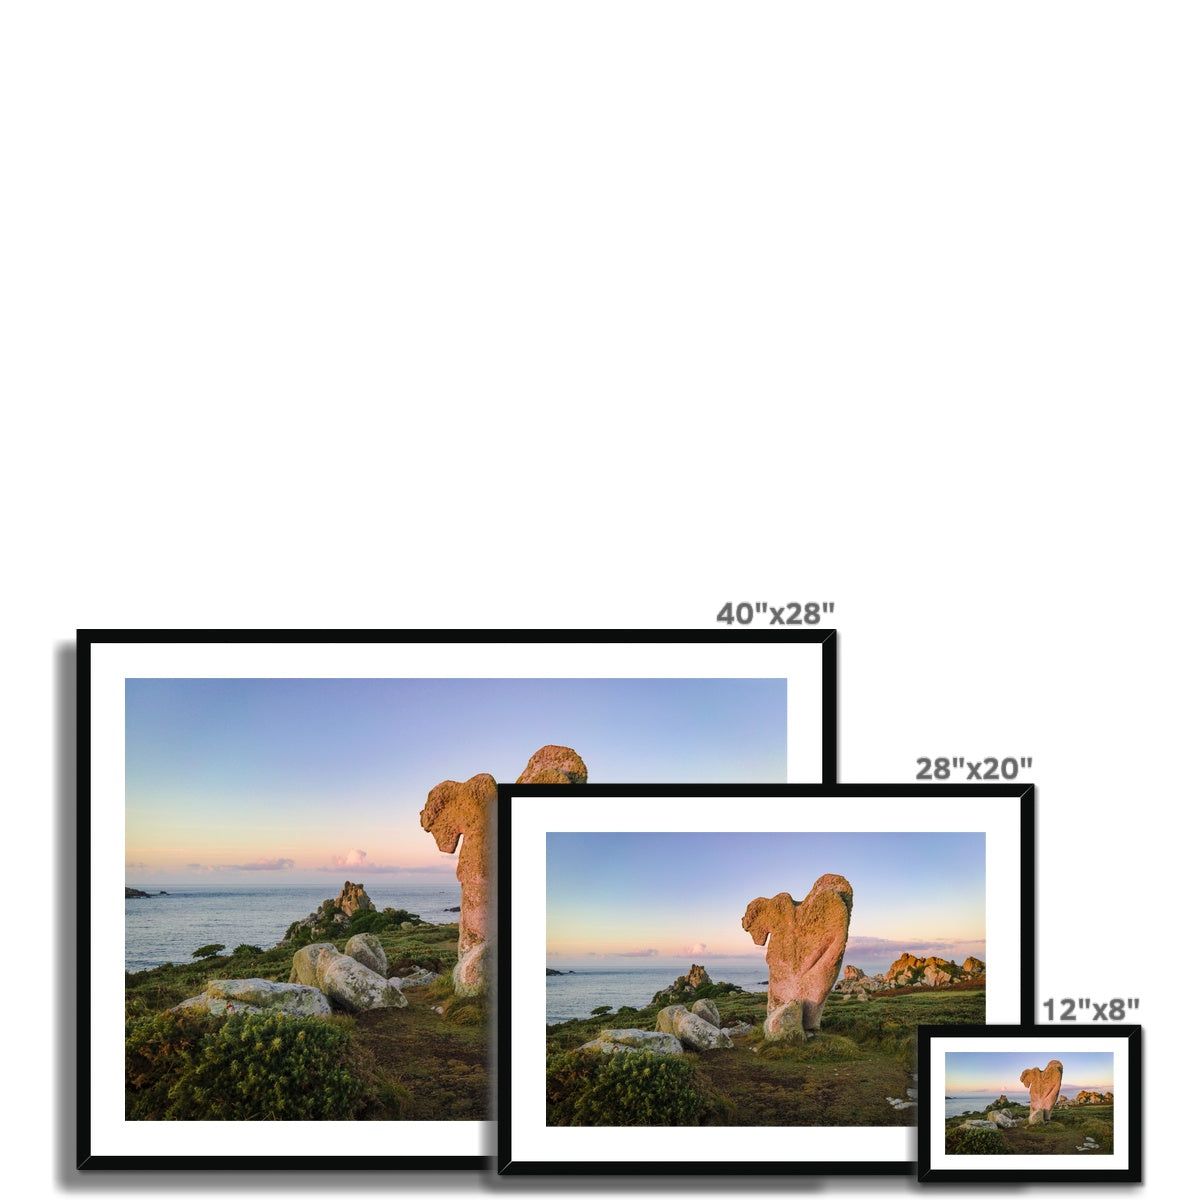 nags head st agnes wooden frame sizes